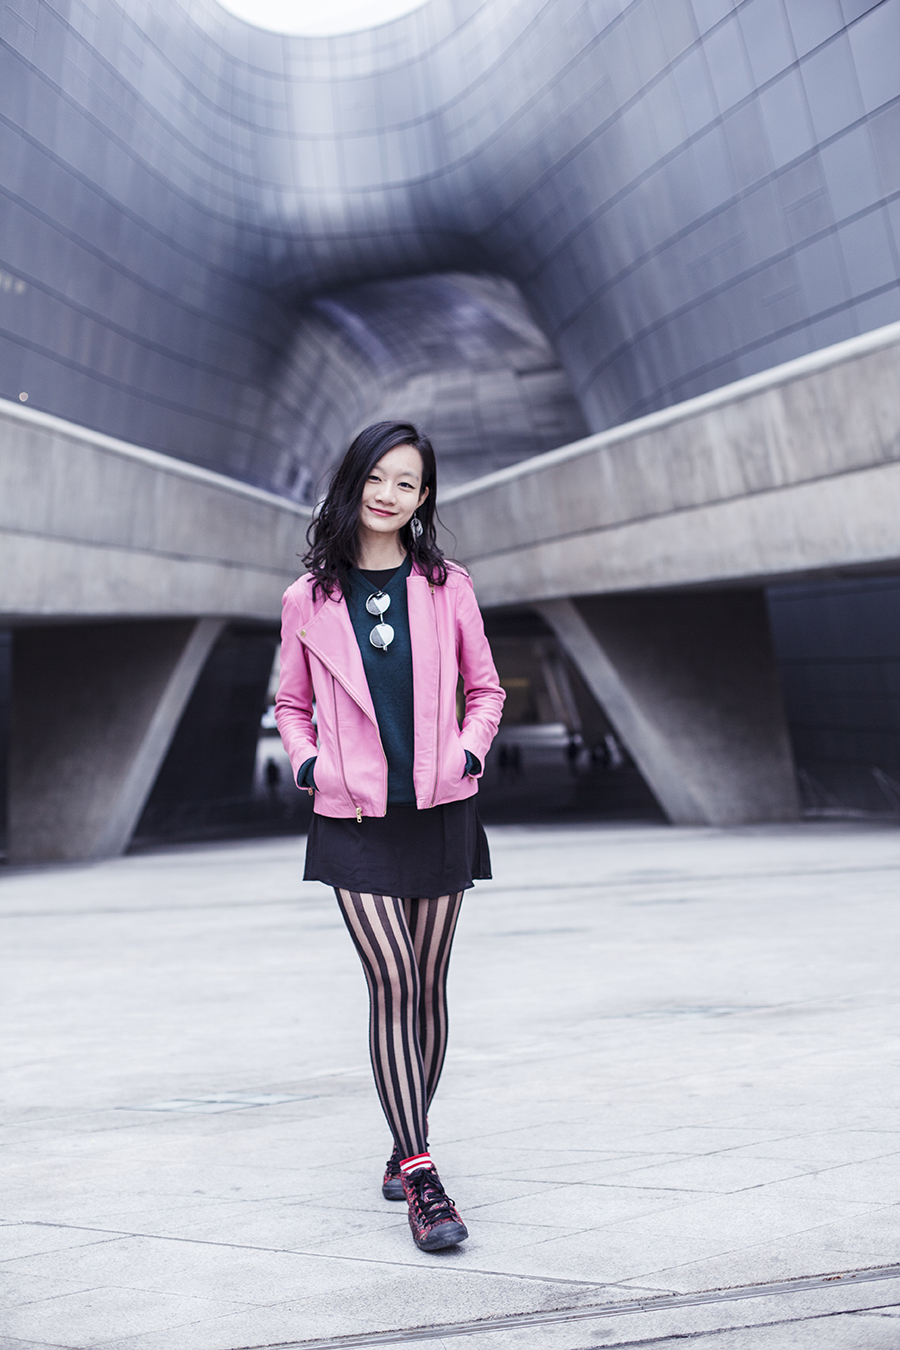 Outfit at Dongdaemun Design Plaza: Viparo pink lambskin leather jacket, H&M green merino wool sweater, H&M Divided black chiffon dress, Nordstrom black striped tights, Taobao mirror circle sunglasses, Alexander McQueen x Puma high top sneakers. Photo taken by Ottie.